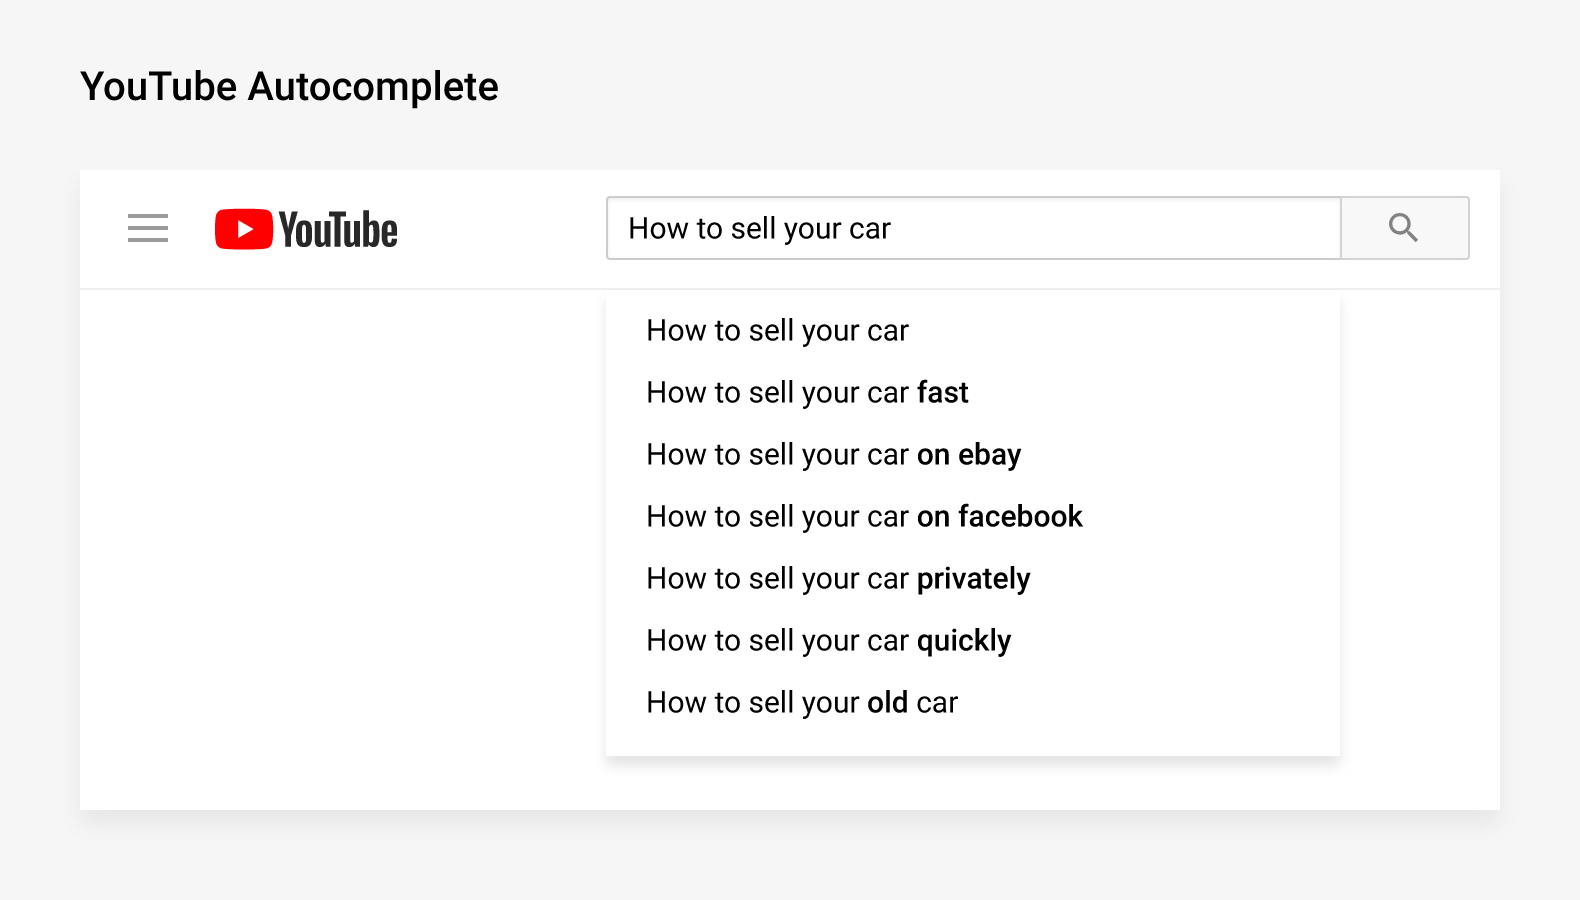 How to rank videos on YouTube? Find the right keywords